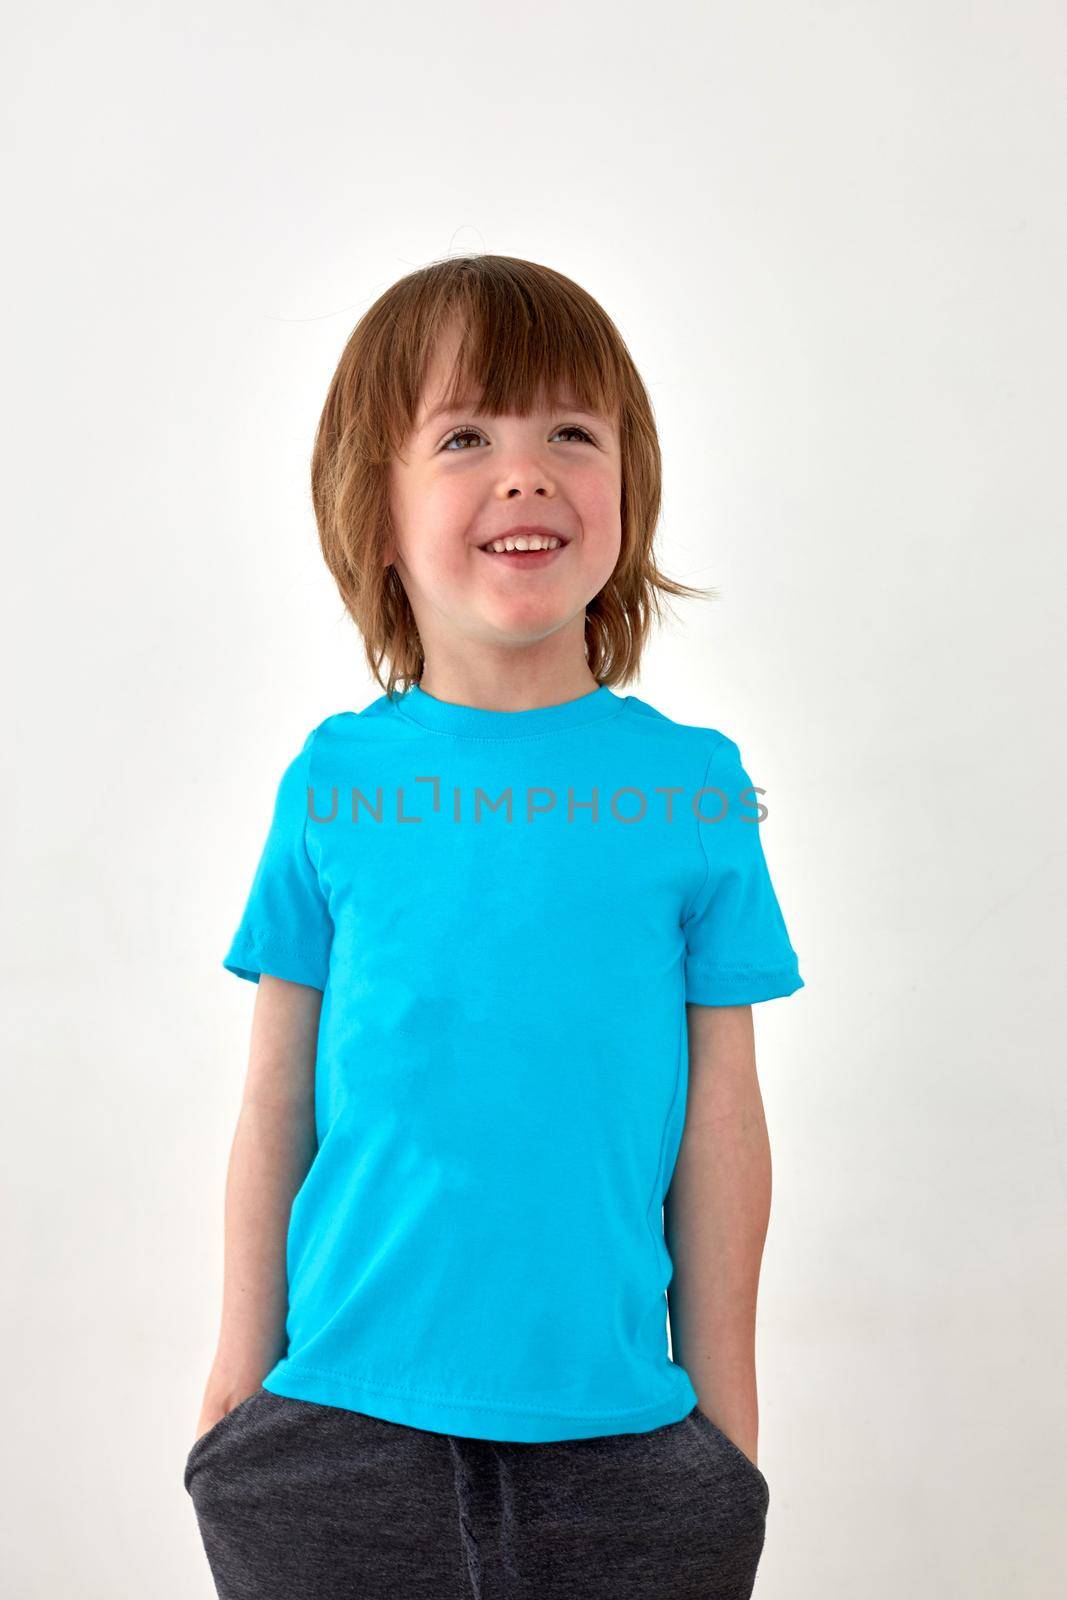 Positive young boy in casual outfit standing on white background by Demkat